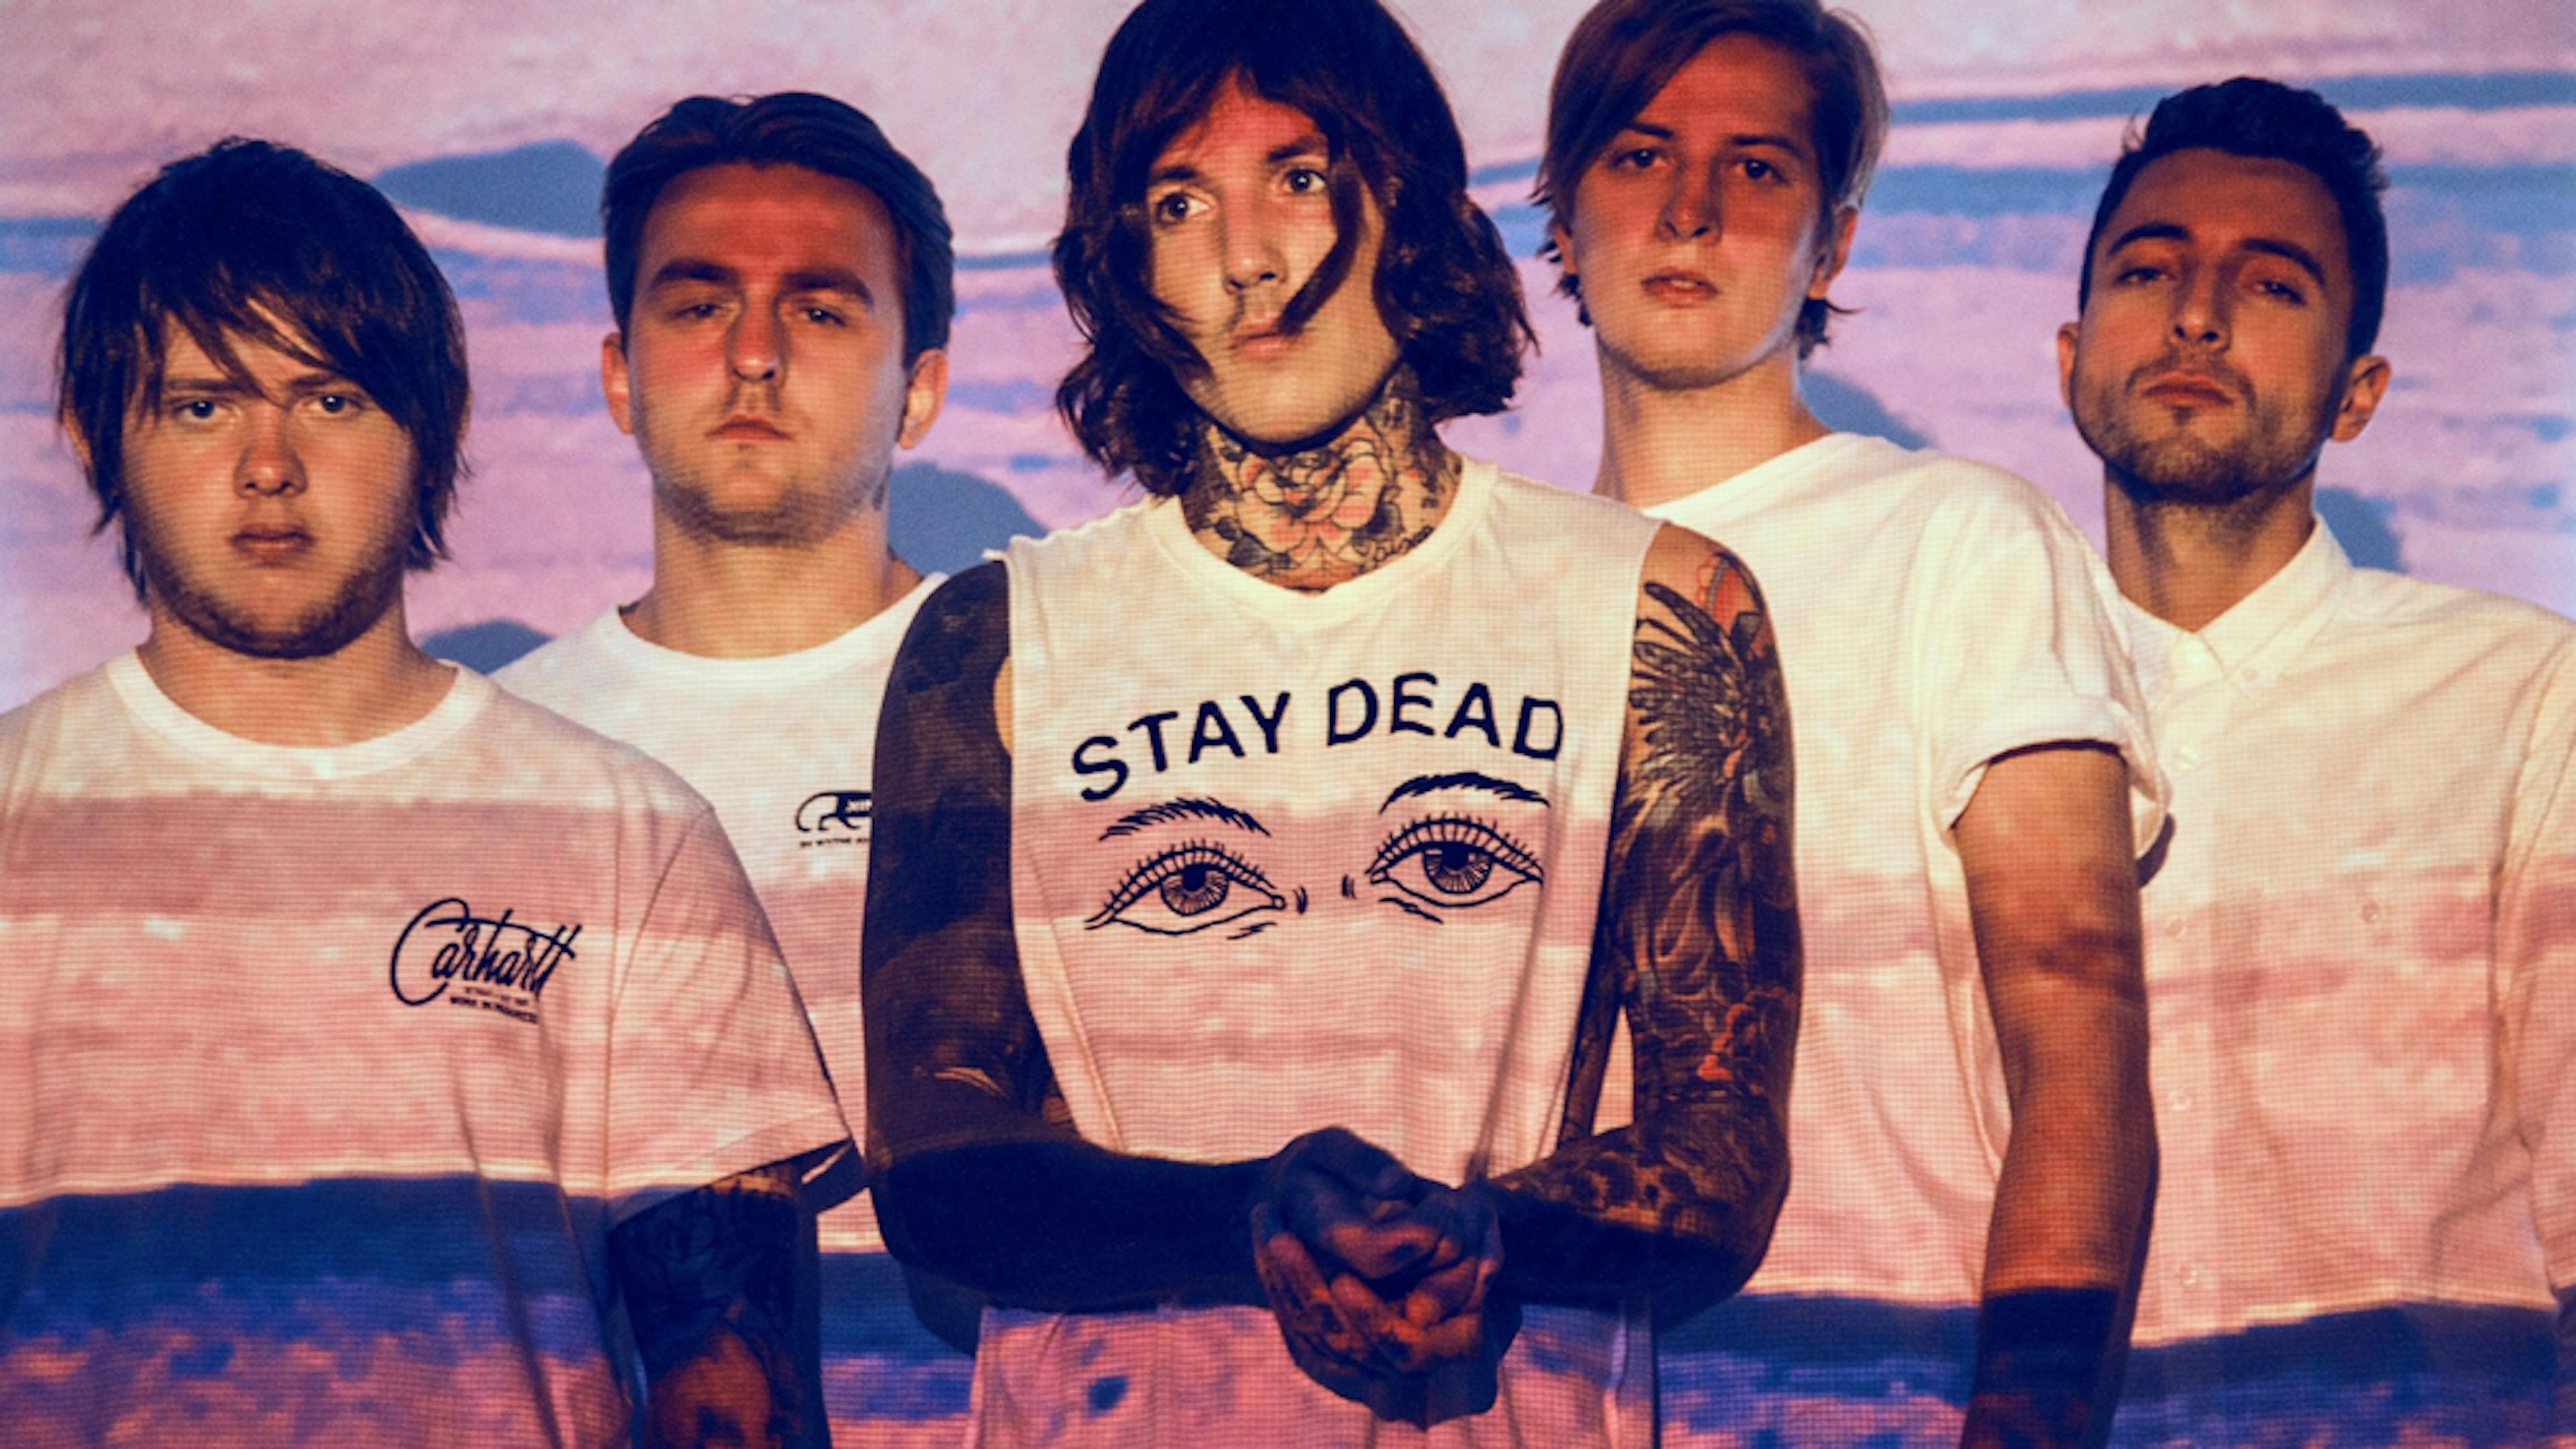 Bring Me The Horizon's "Cult" Posters Have Turned Up In Chicago